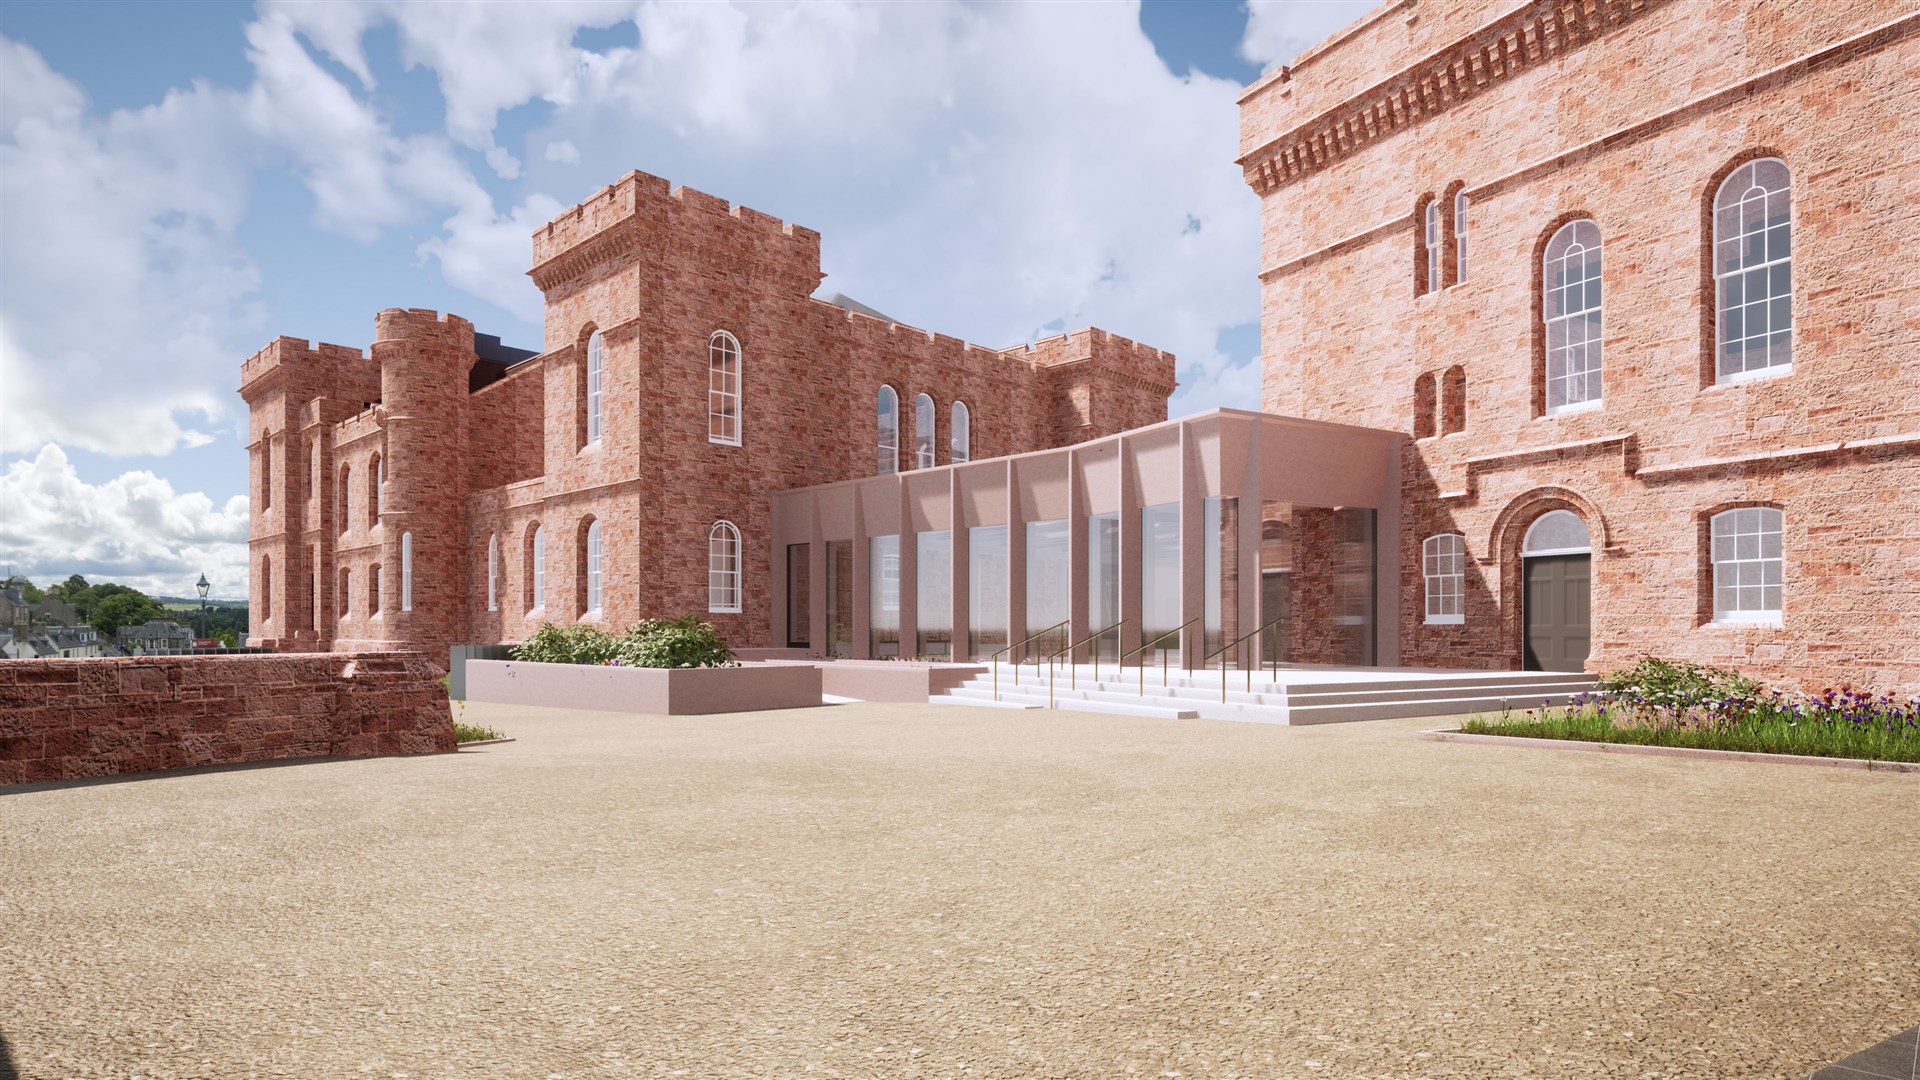 An artist's impression of the work due to take place at Inverness Castle.